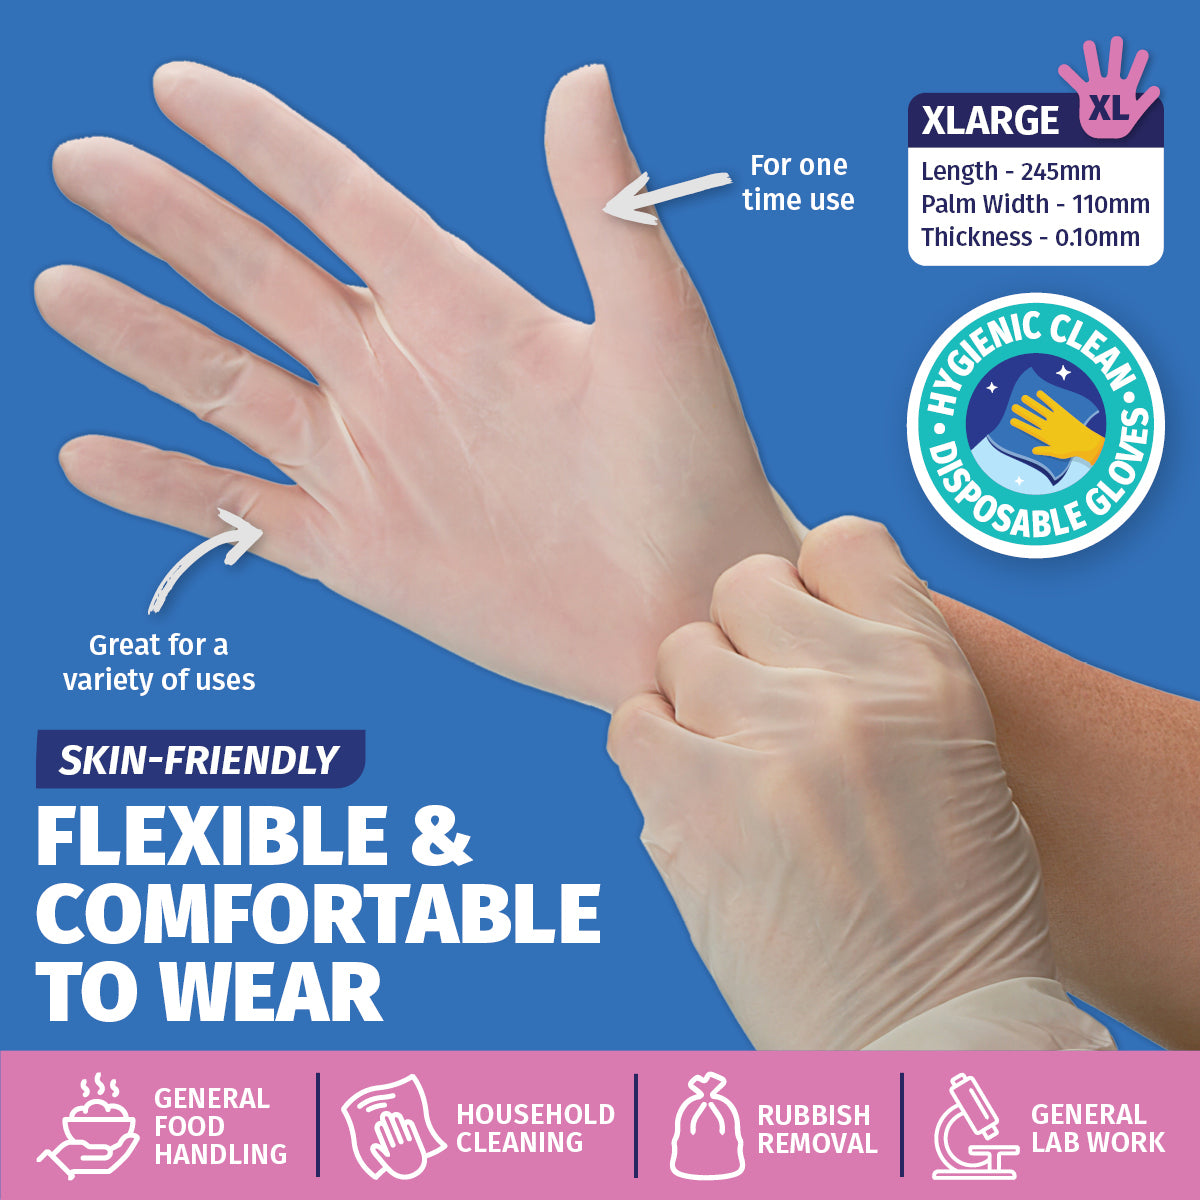 Xtra Kleen 1000PCE Disposable Gloves Latex & Powder Free Food Safe XL Sizing